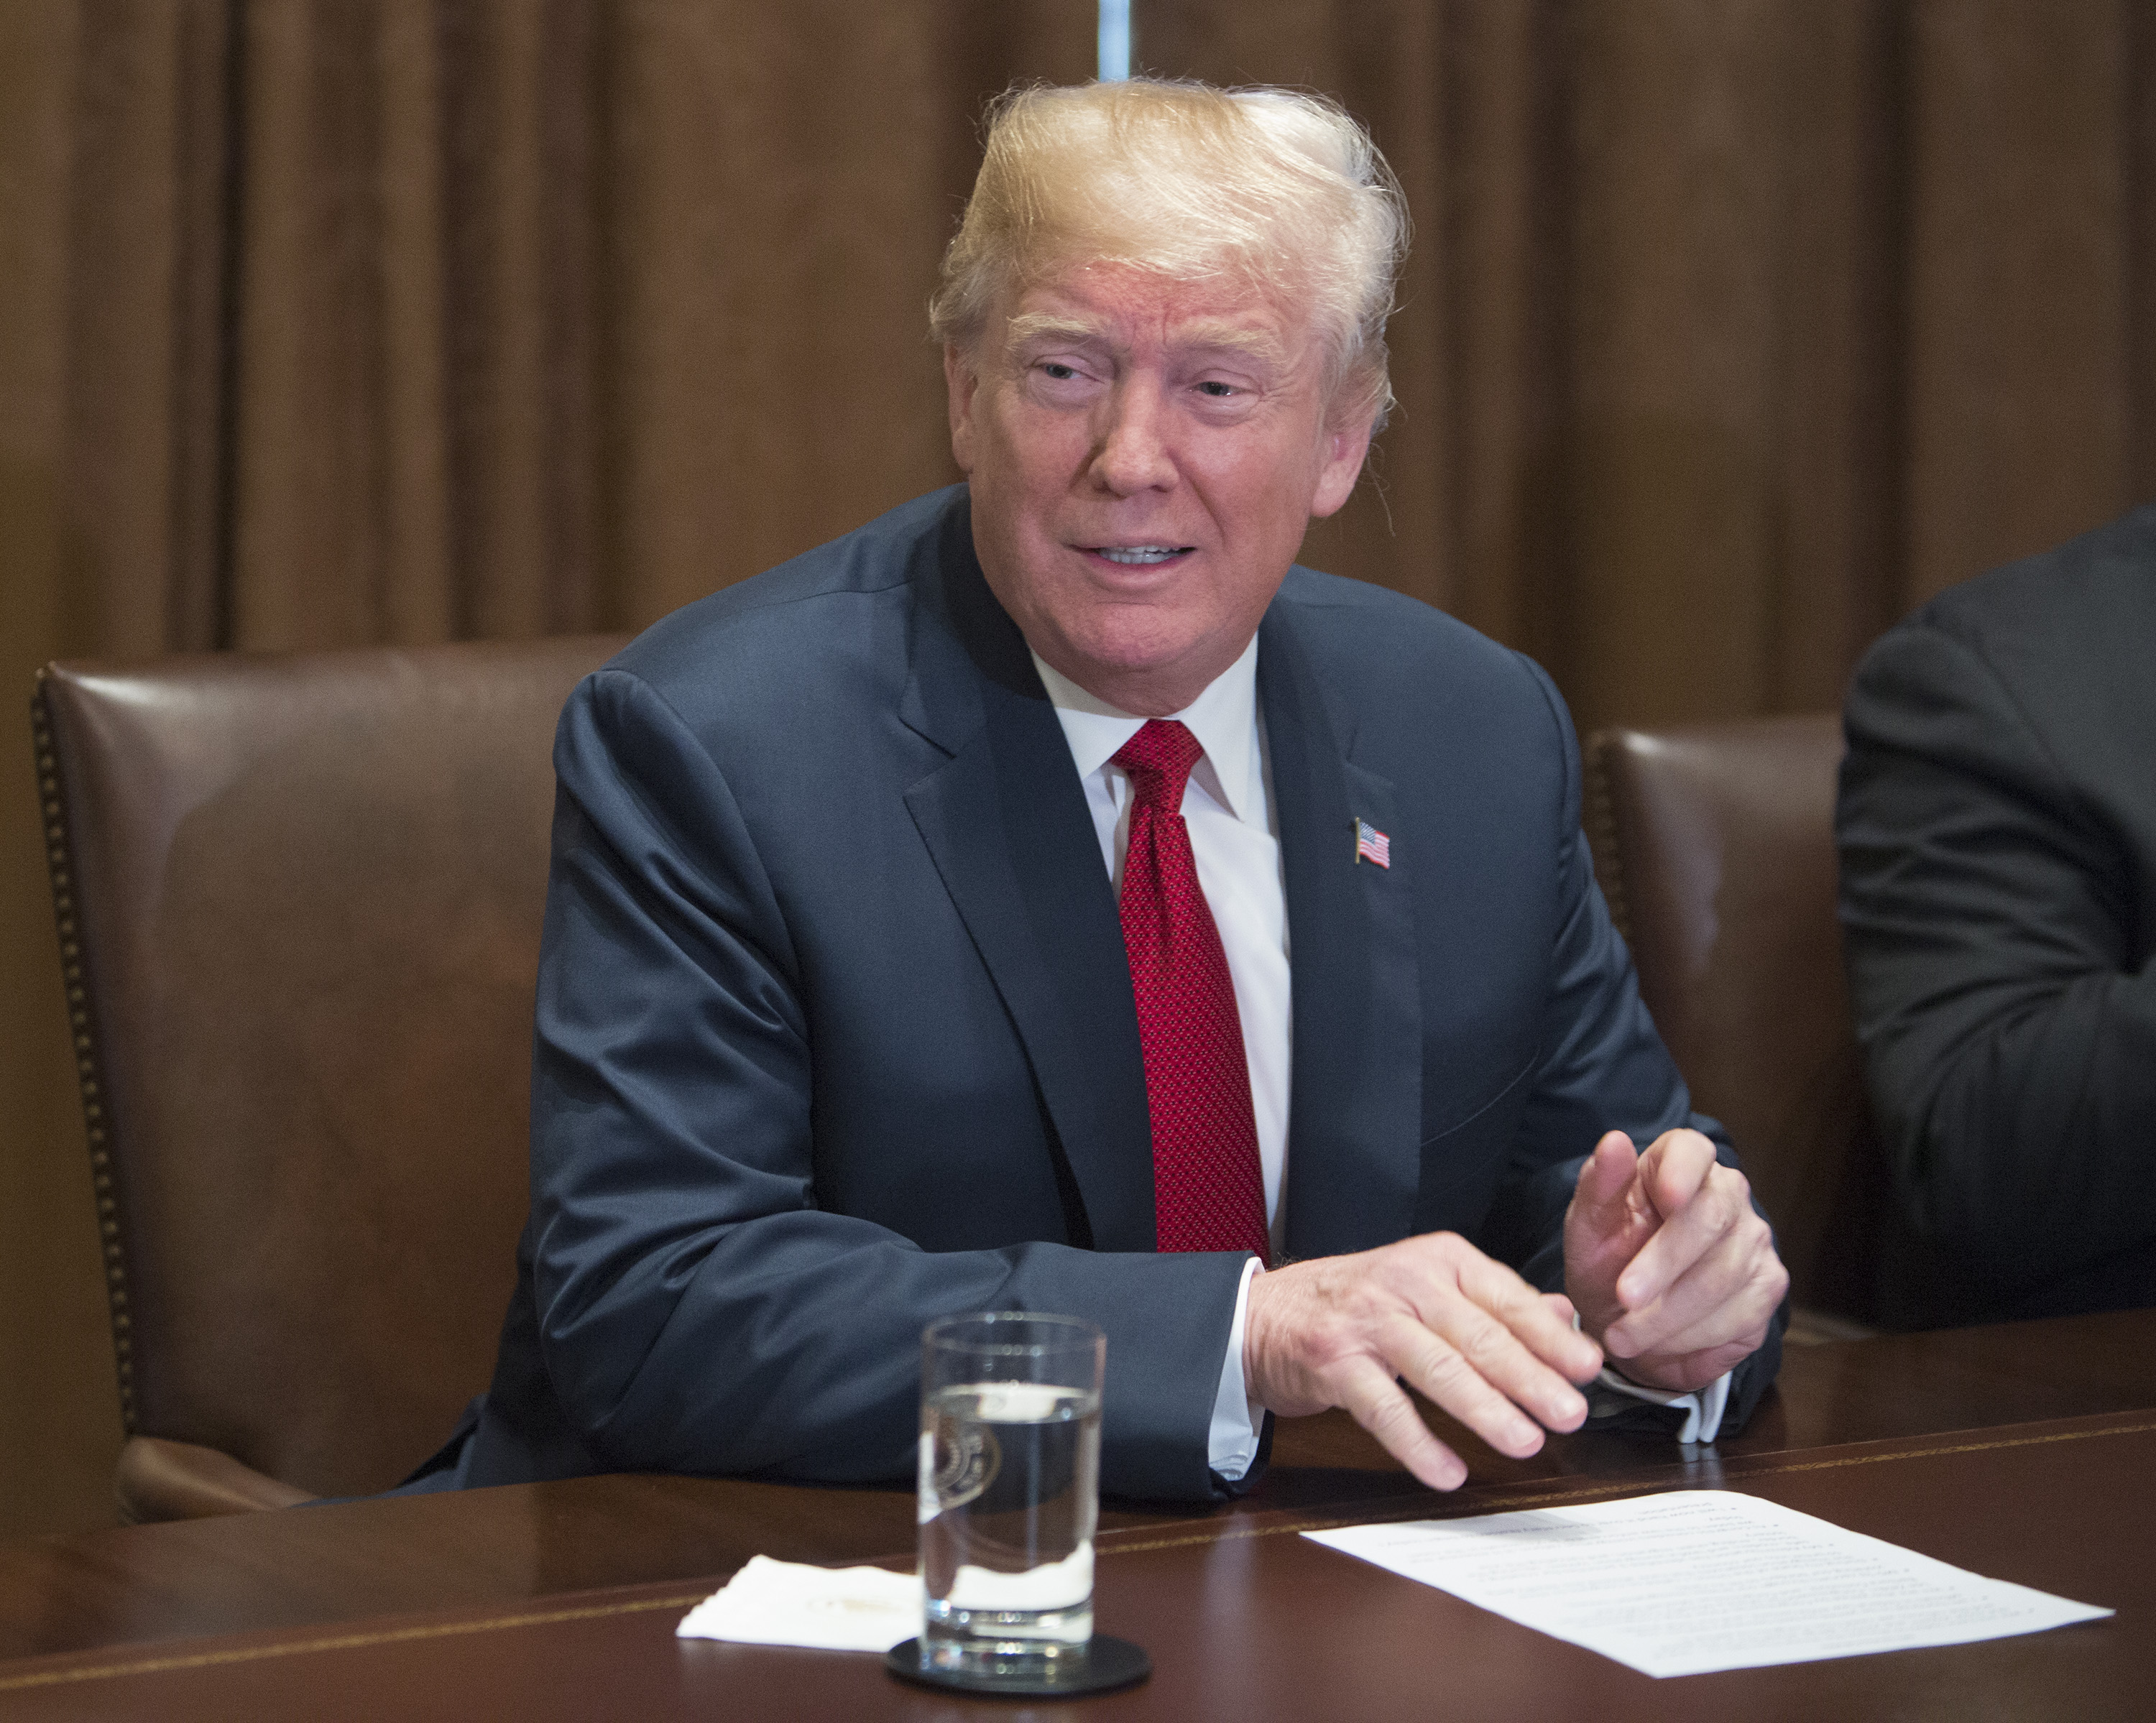 U.S. President Donald Trump Hosts Law Enforcement Round Table On MS-13